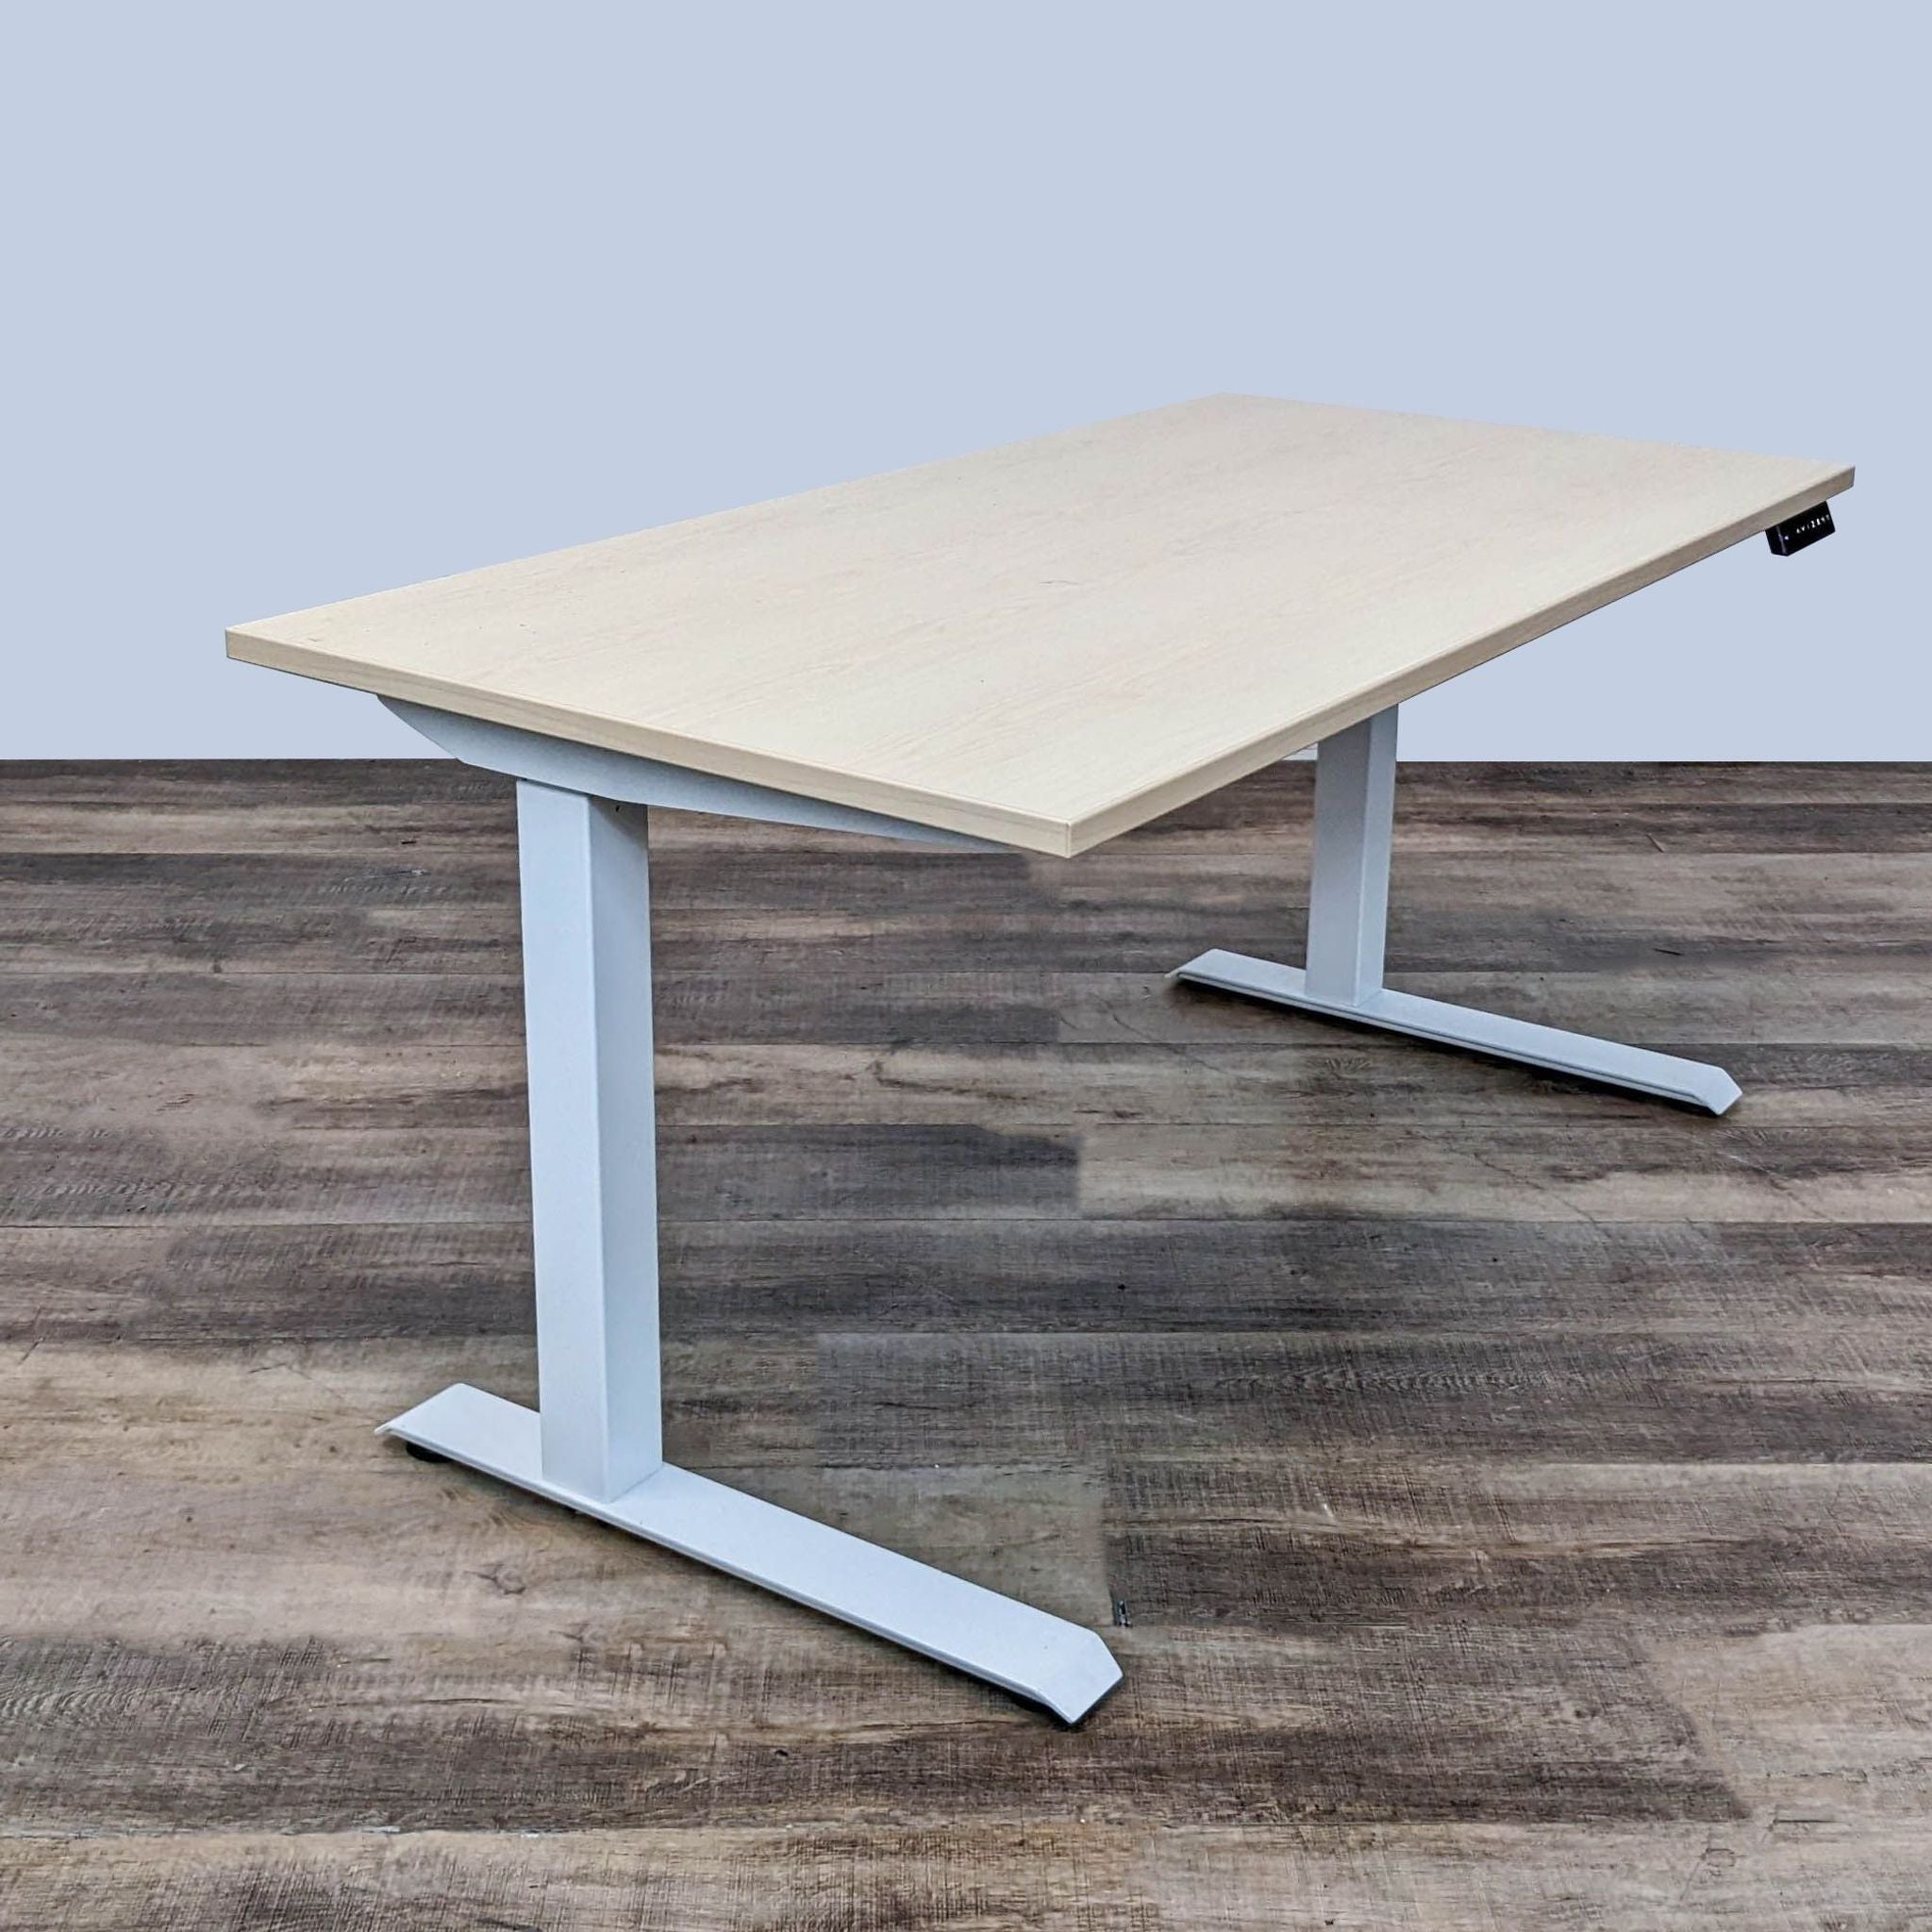 Ergonomic electric standing desk by AMQ, featuring adjustable height controls and a stylish oak finish.